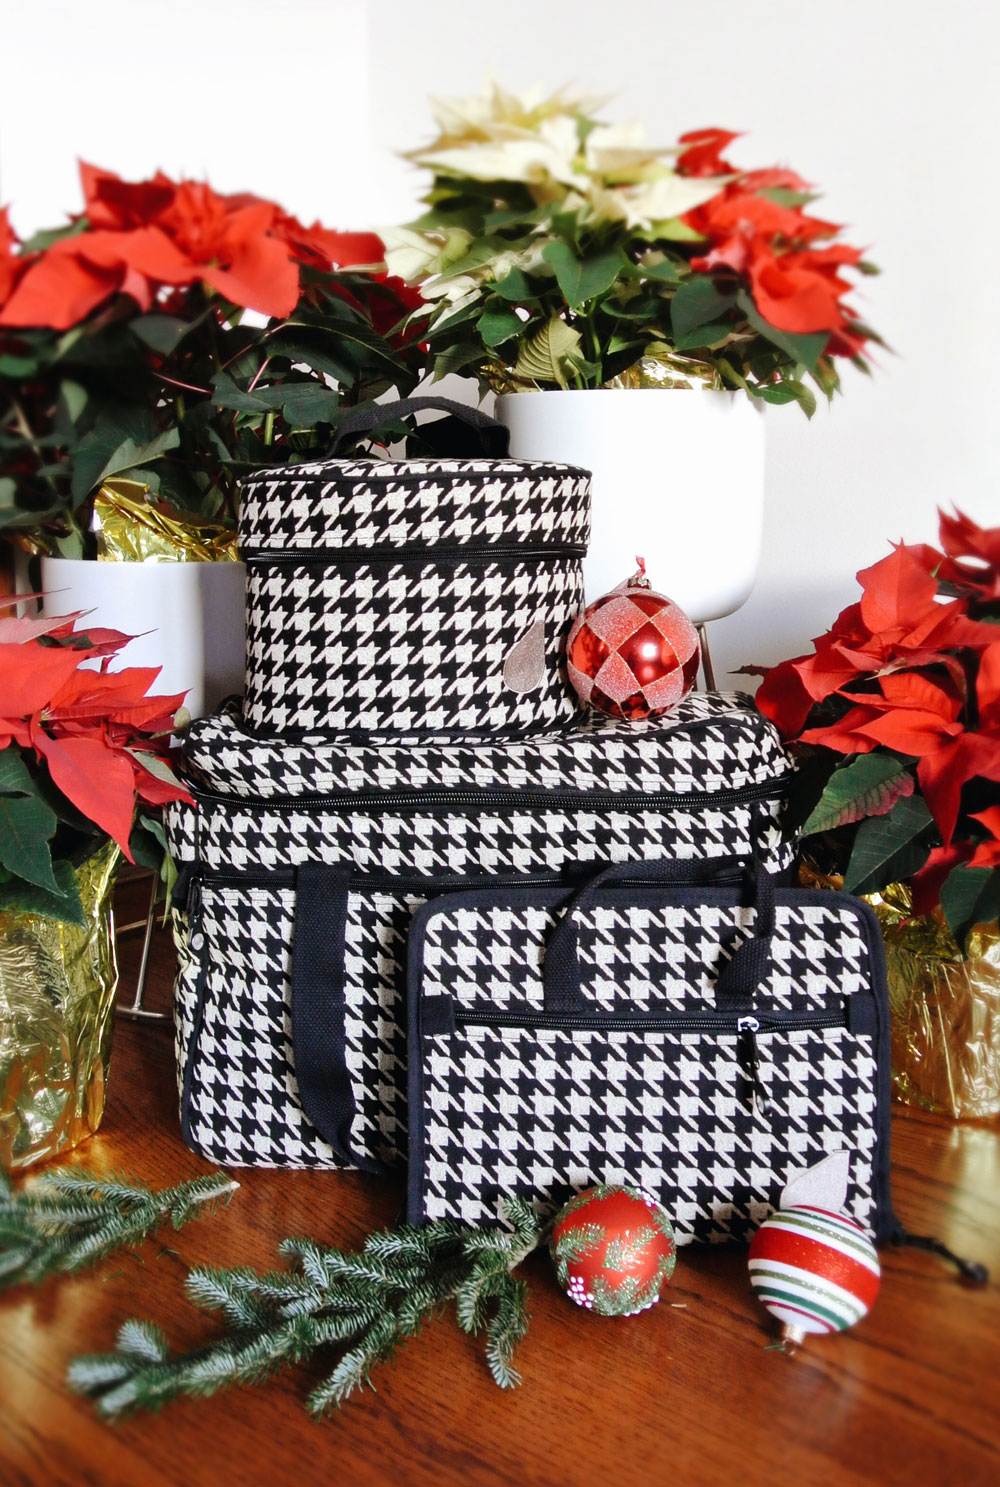 Stay Organized with Bluefig Sewing Bags! Stylish and Practical Sewing Bags | Suzy Quilts https://suzyquilts.com/bluefig-sewing-bags